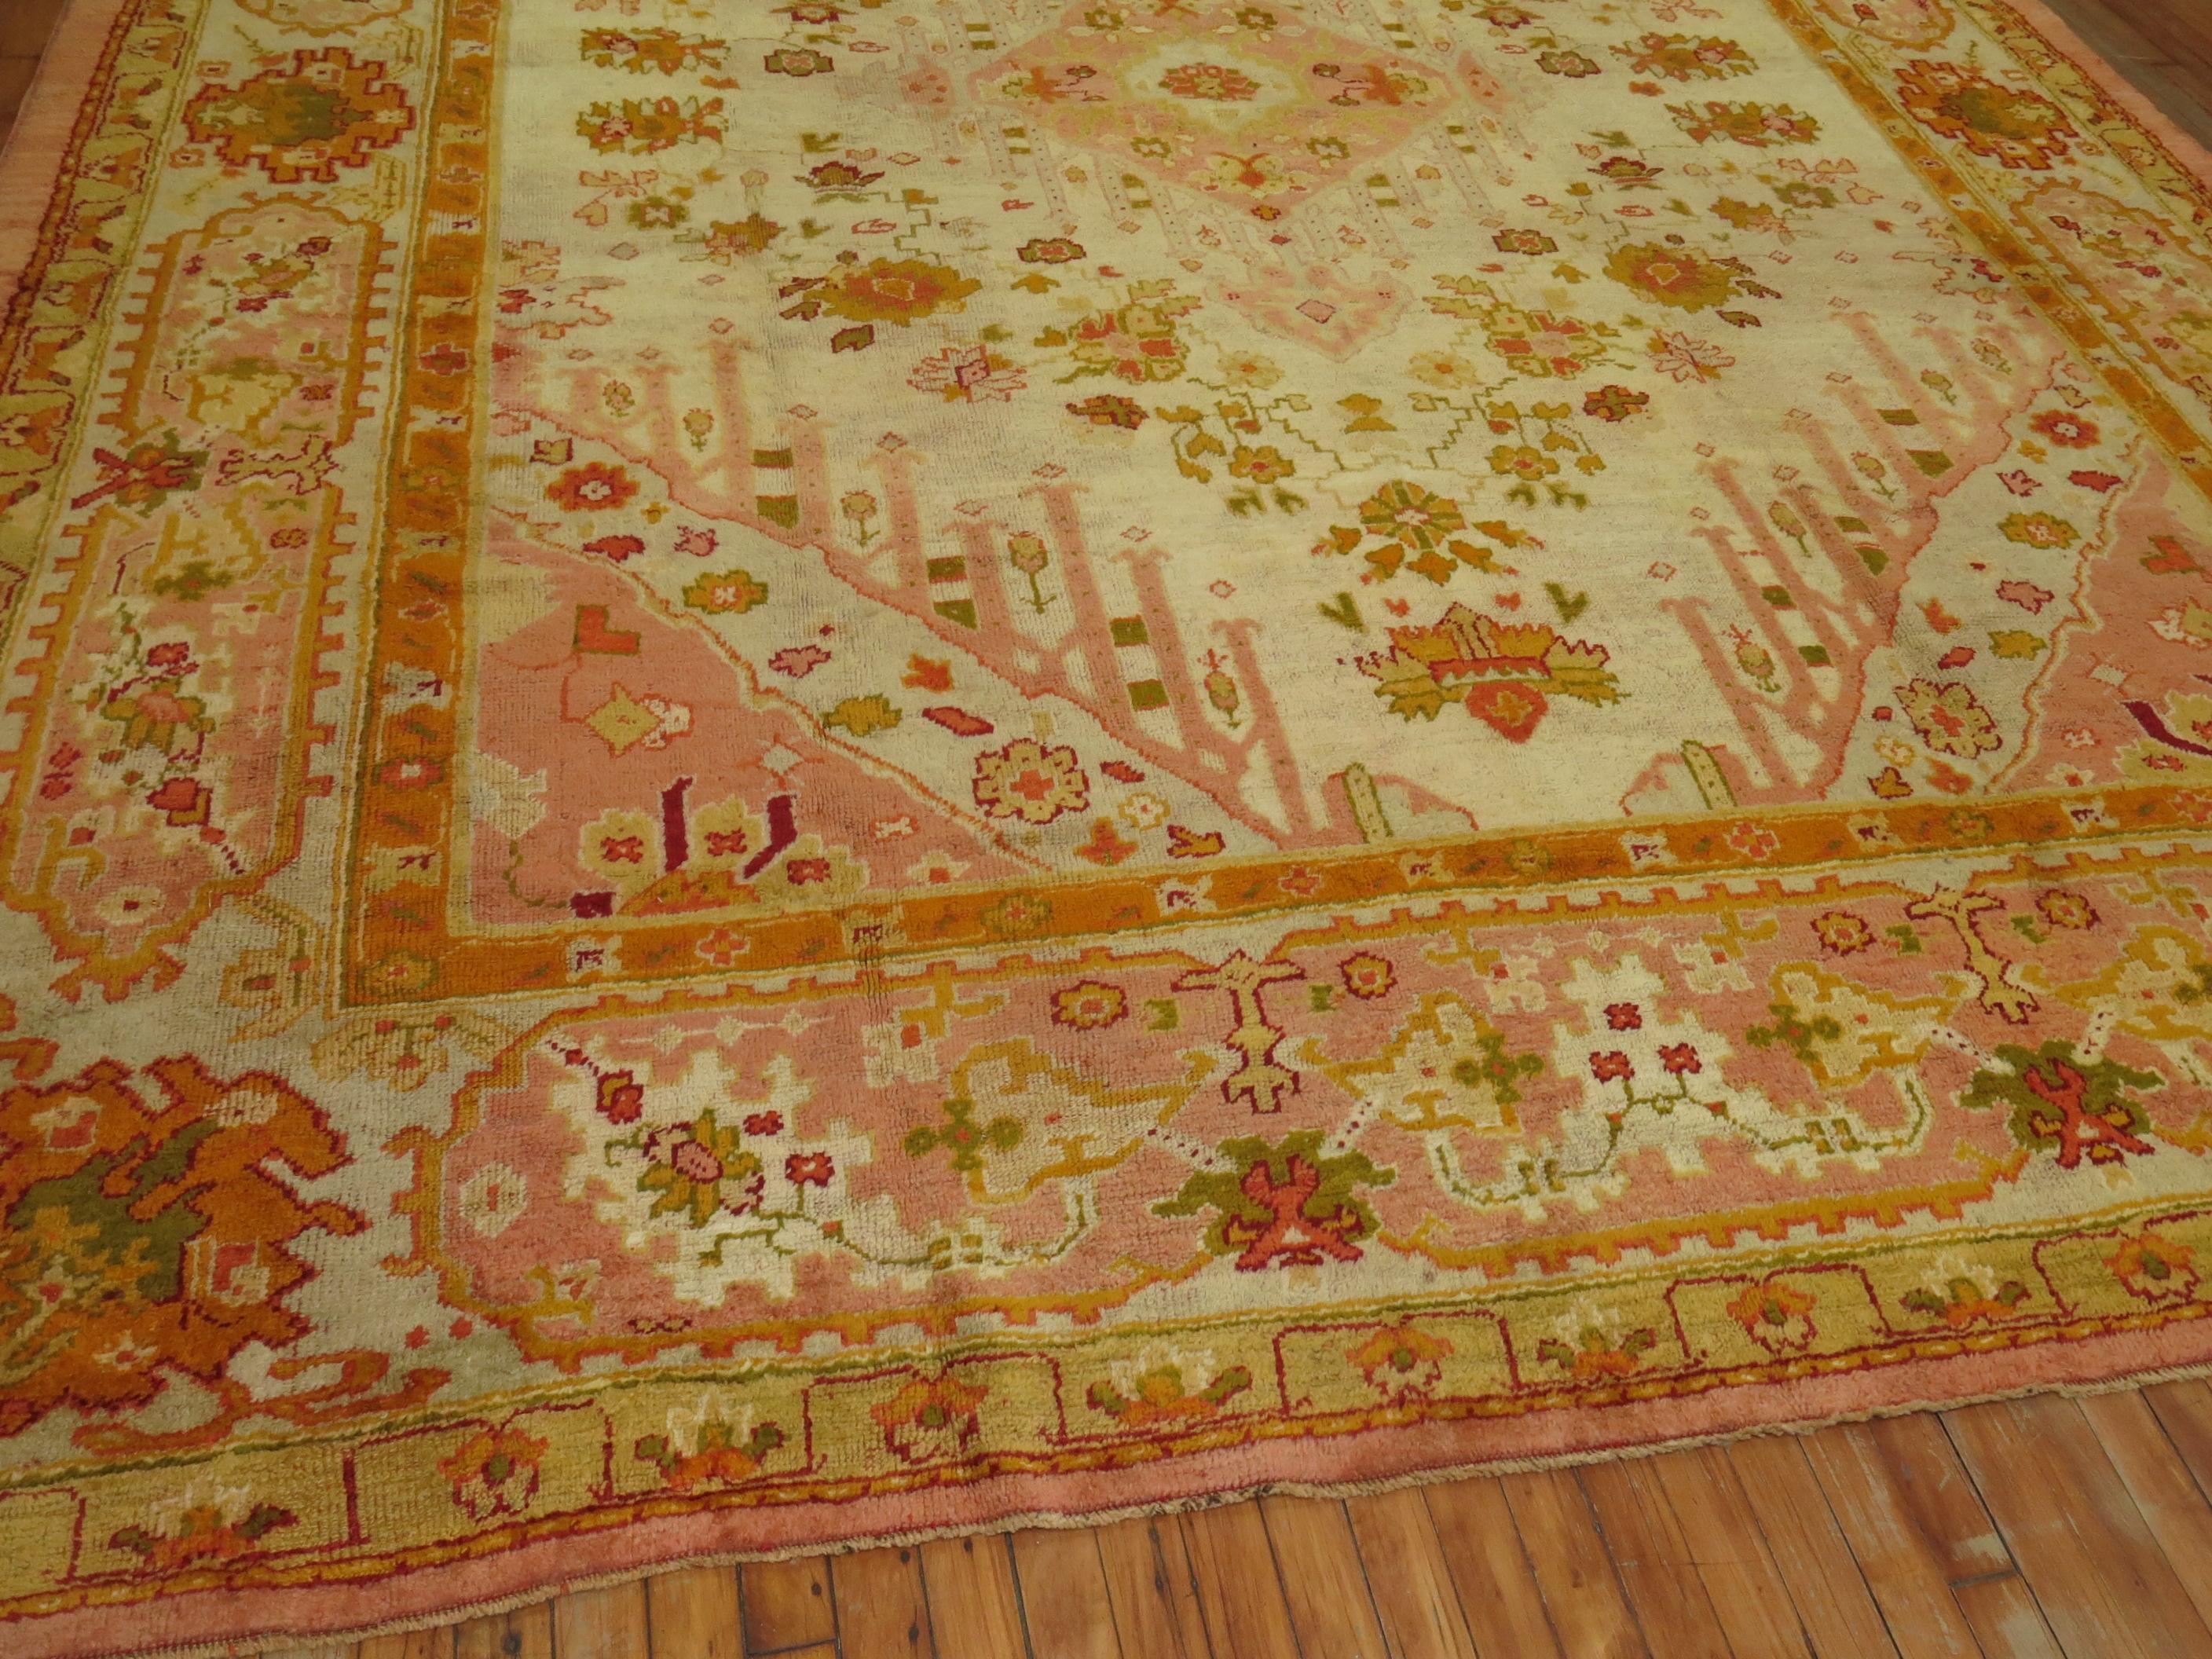 An early 20th-century room size Antique Turkish Oushak rug in predominantly ivory field, dominant accents in fire orange and pink

Measures: 10'3'' x 13'4''

Oushak rugs originated in the small town of Oushak in west-central Anatolia, today just